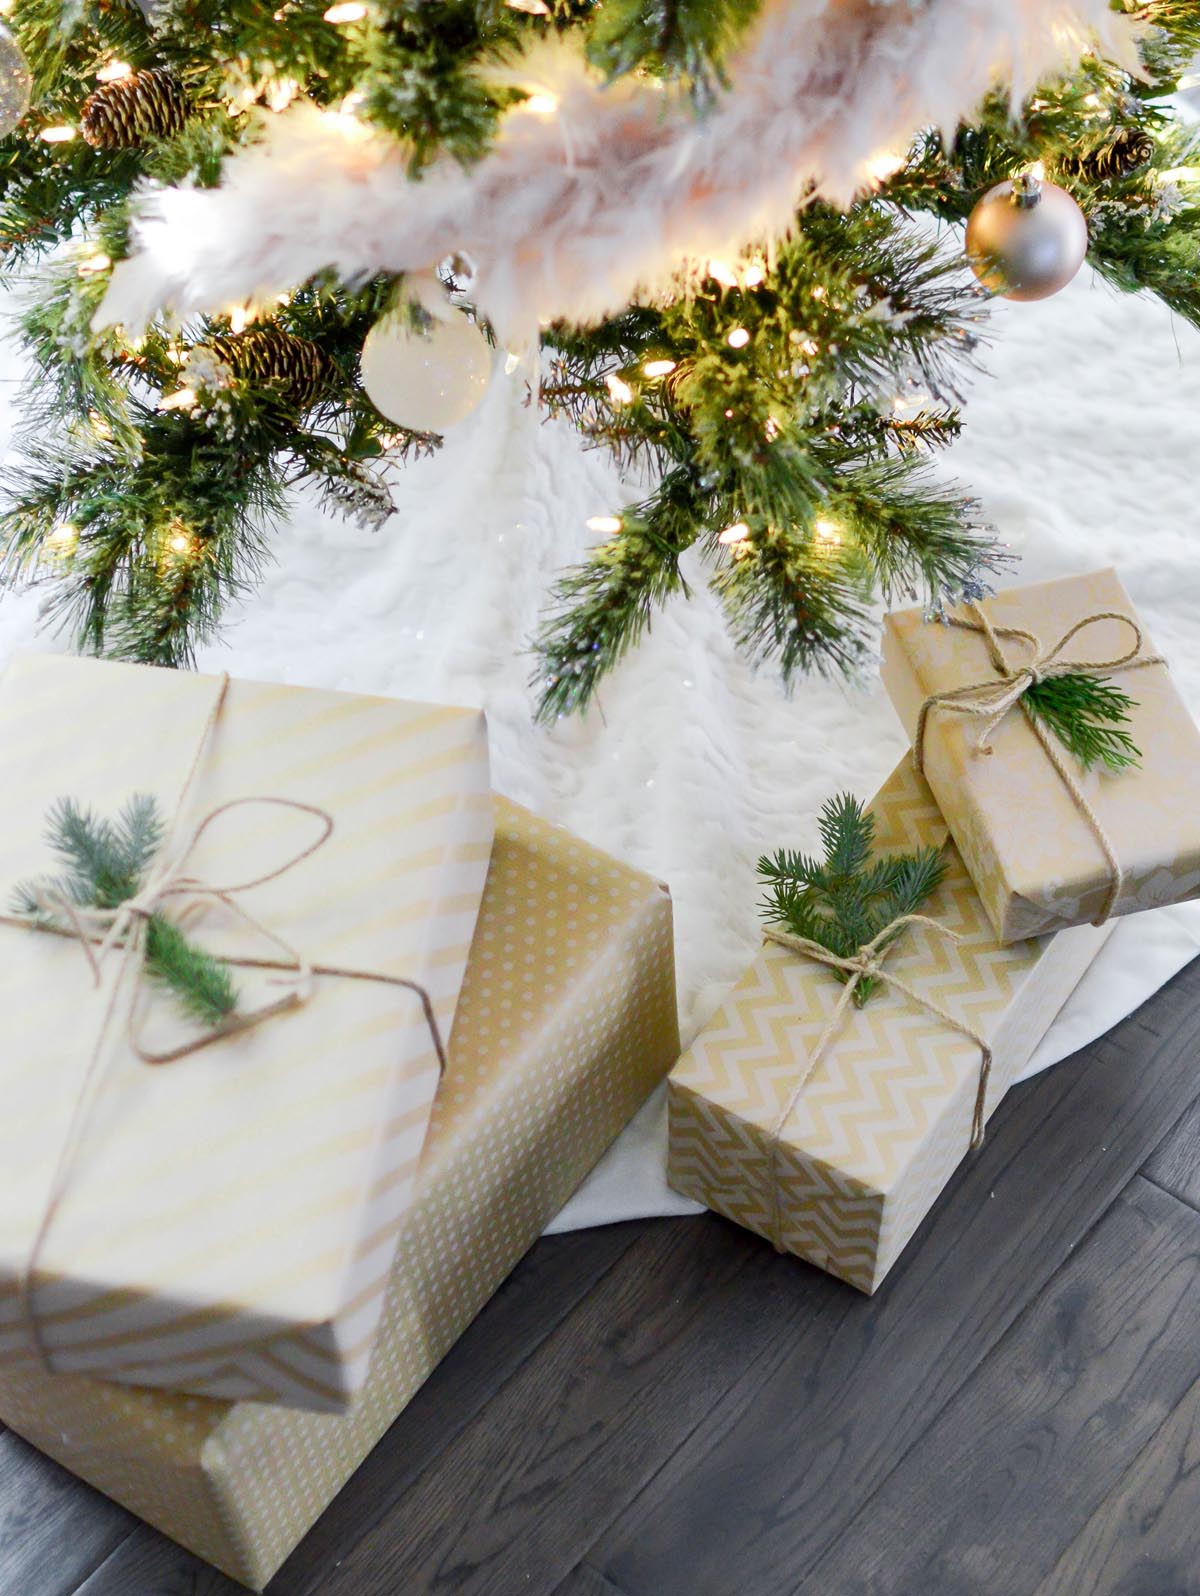 The Ultimate Holiday Skincare Gifts - Sente Labs